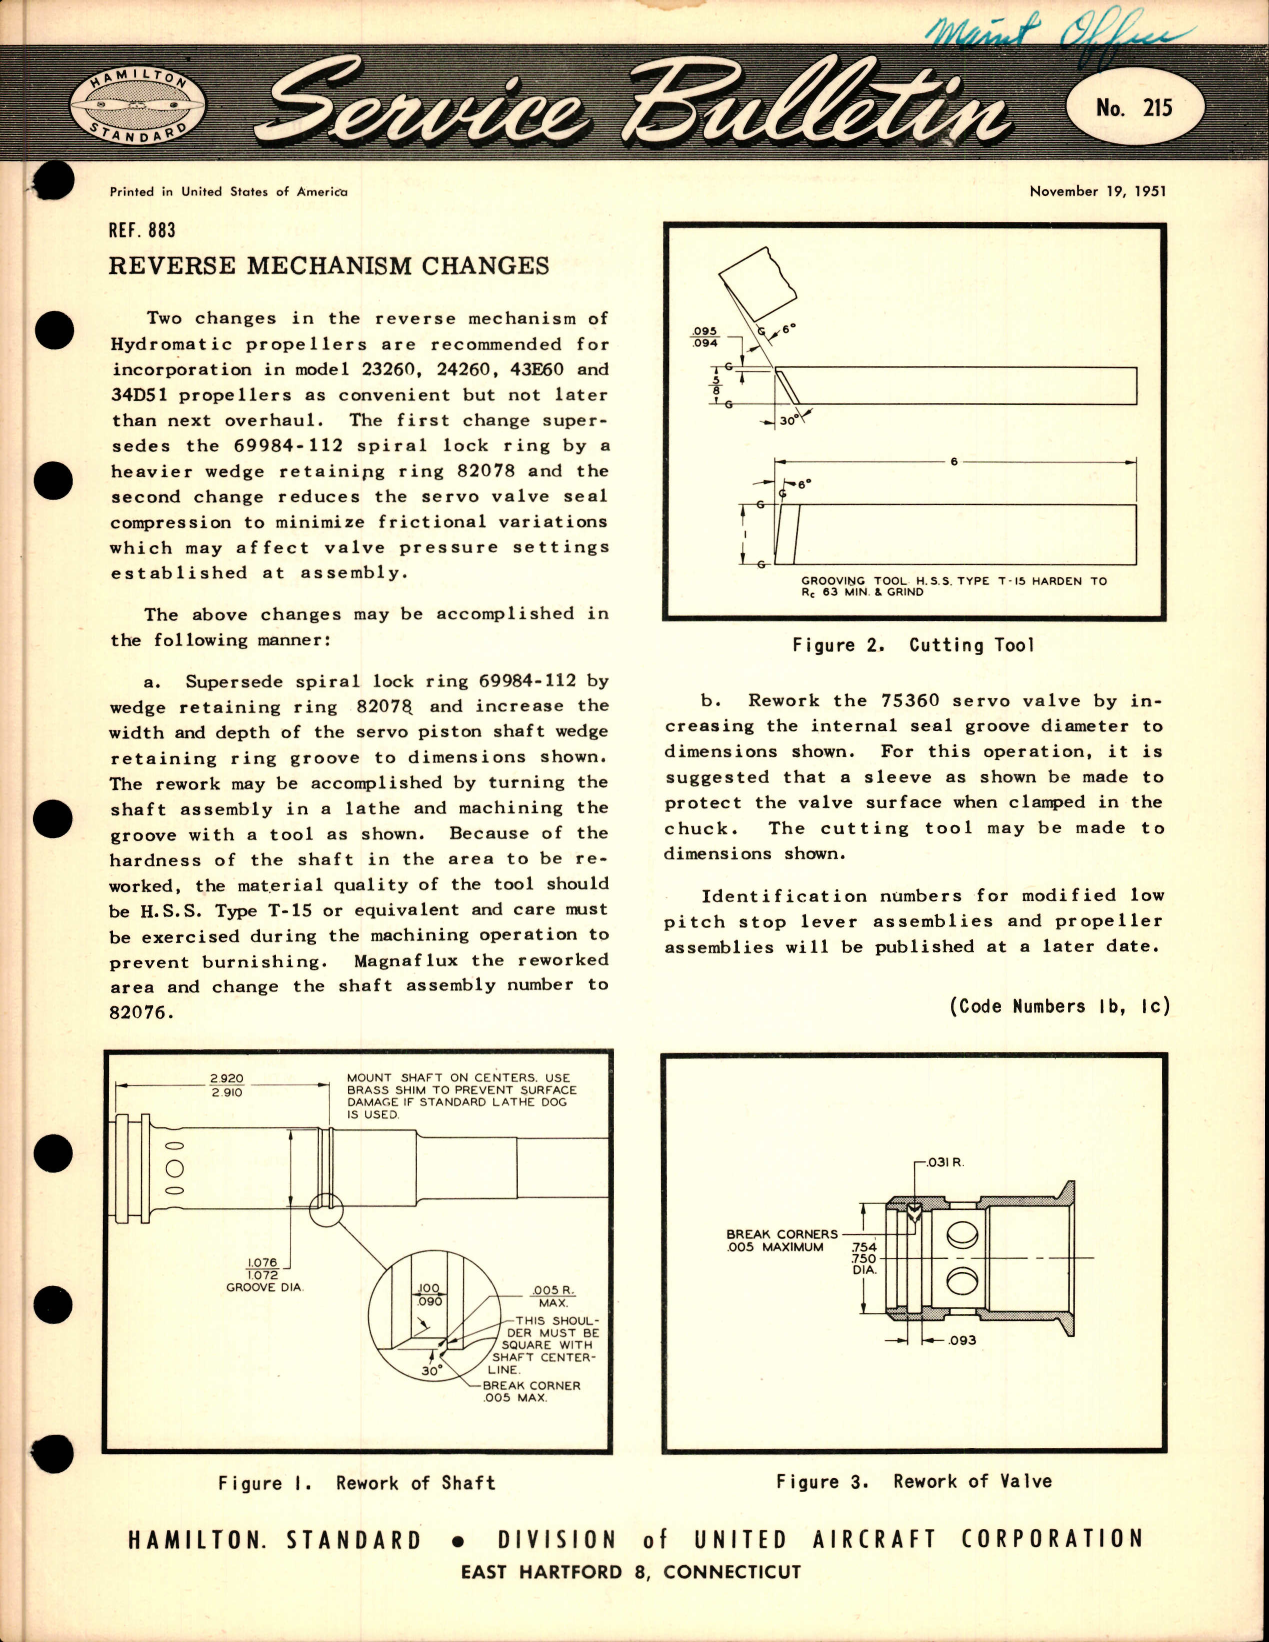 Sample page 1 from AirCorps Library document: Reverse Mechanism Changes, Ref 883